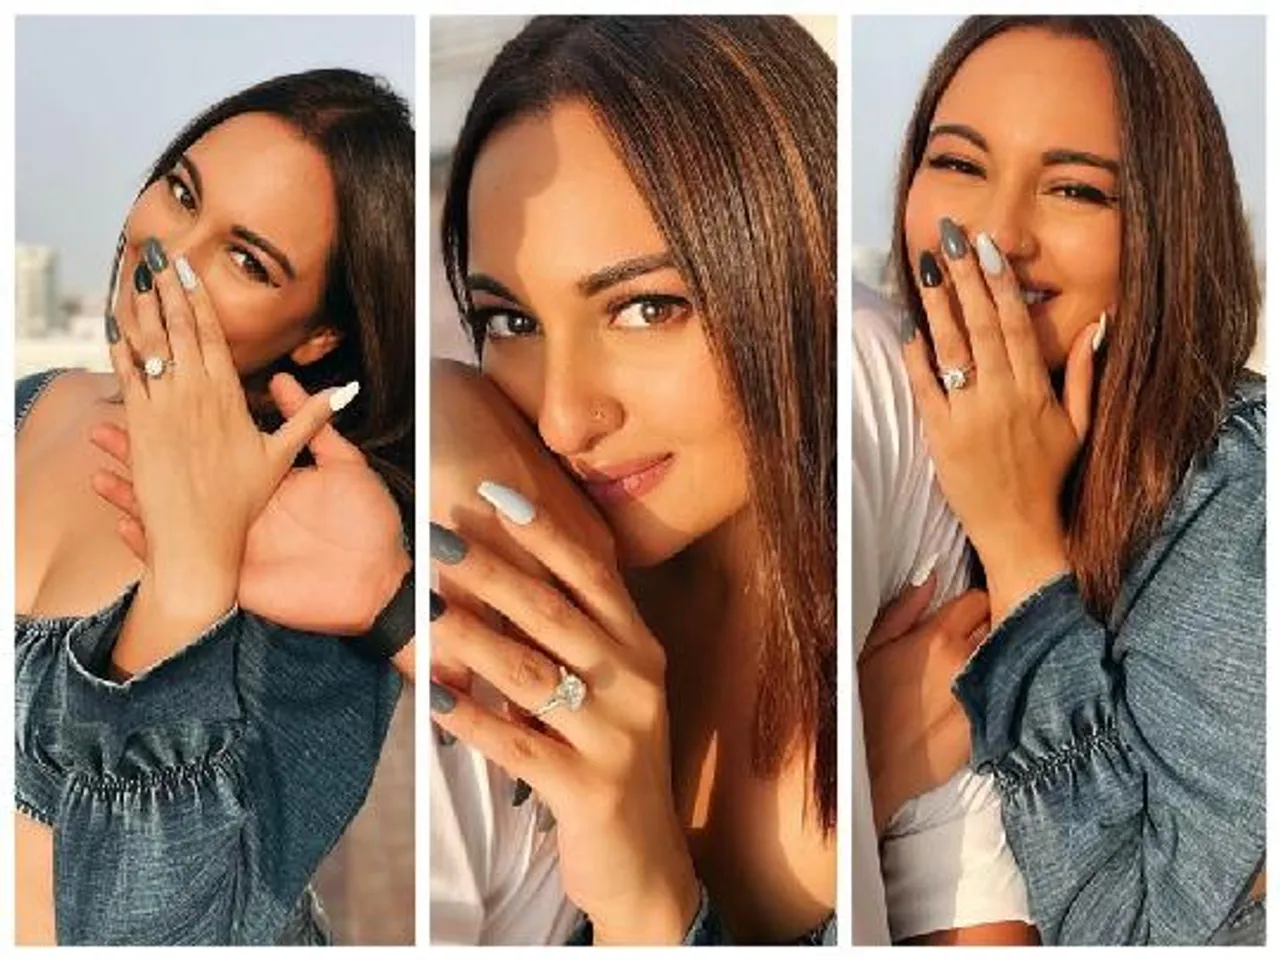 Sonakshi Sinha Shares A Cryptic Post, Flaunting Engagement Ring